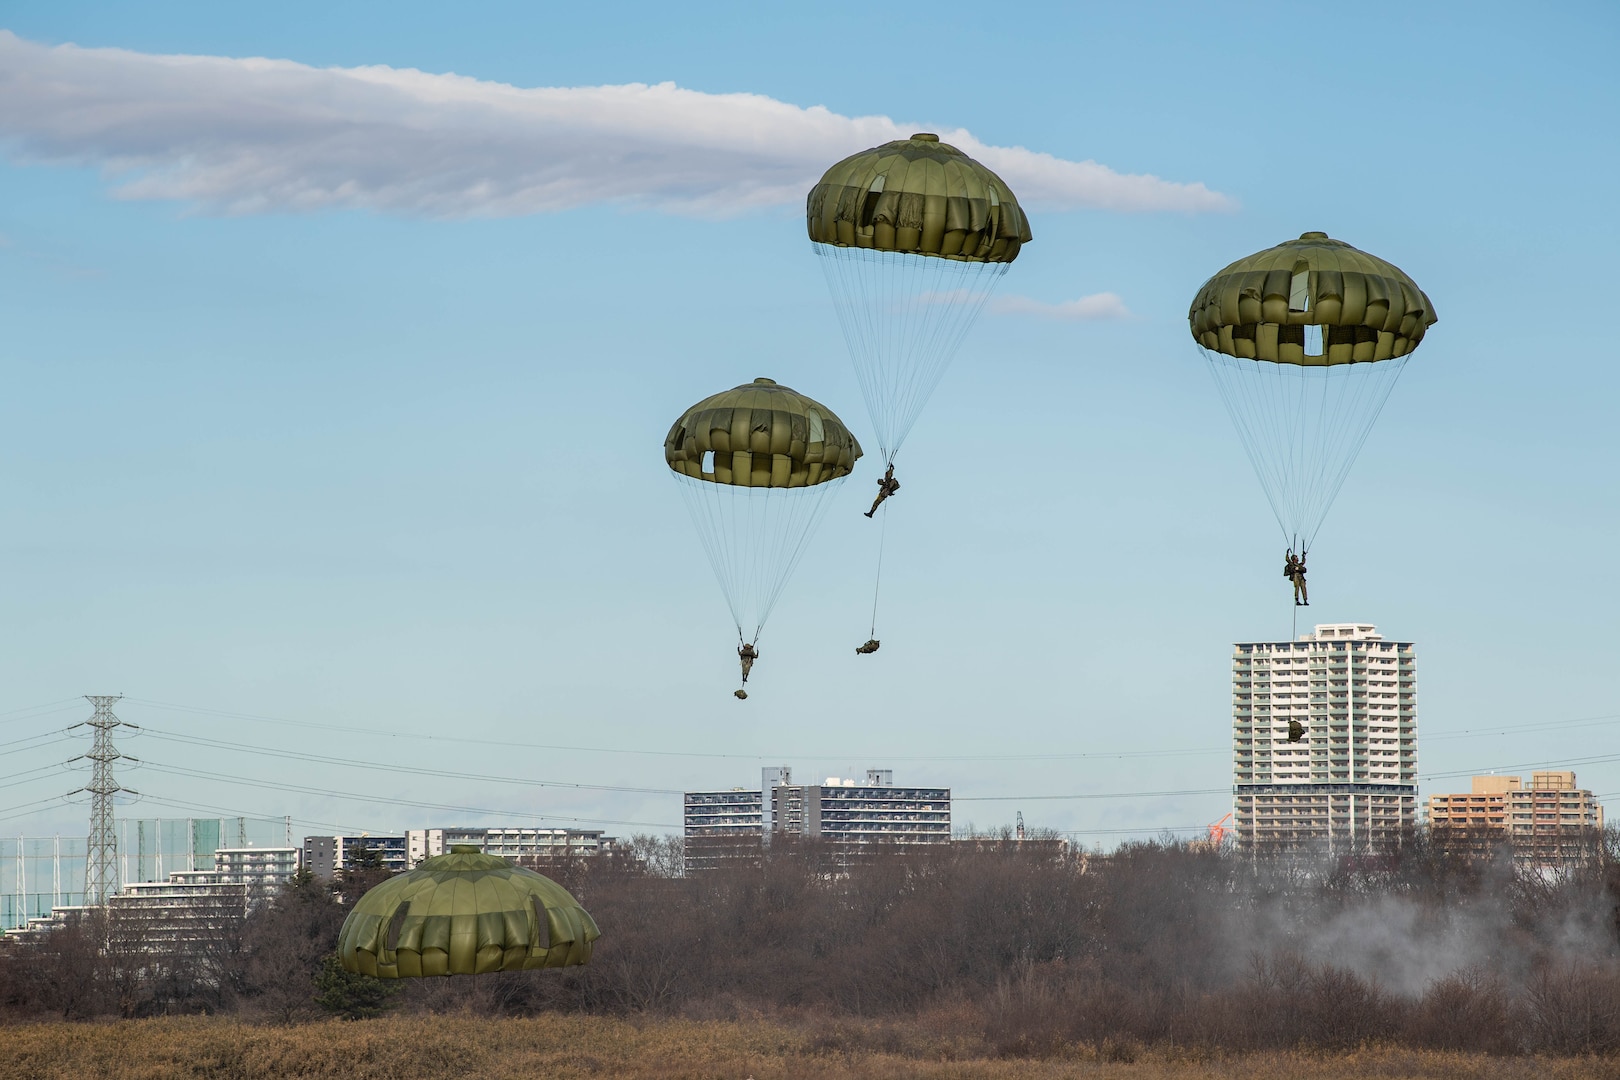 Japan Ground Self-Defense Force paratroopers from the 1st Airborne Brigade descend to a drop zone during the annual New Year's Jump exhibition at Camp Narashino, Japan, Jan. 7, 2024. The New Year's Jump not only brought together U.S. and Japanese forces, but also created a platform for international allies and partners to collaborate. (U.S. Air Force photo by Airman 1st Class Natalie Doan)